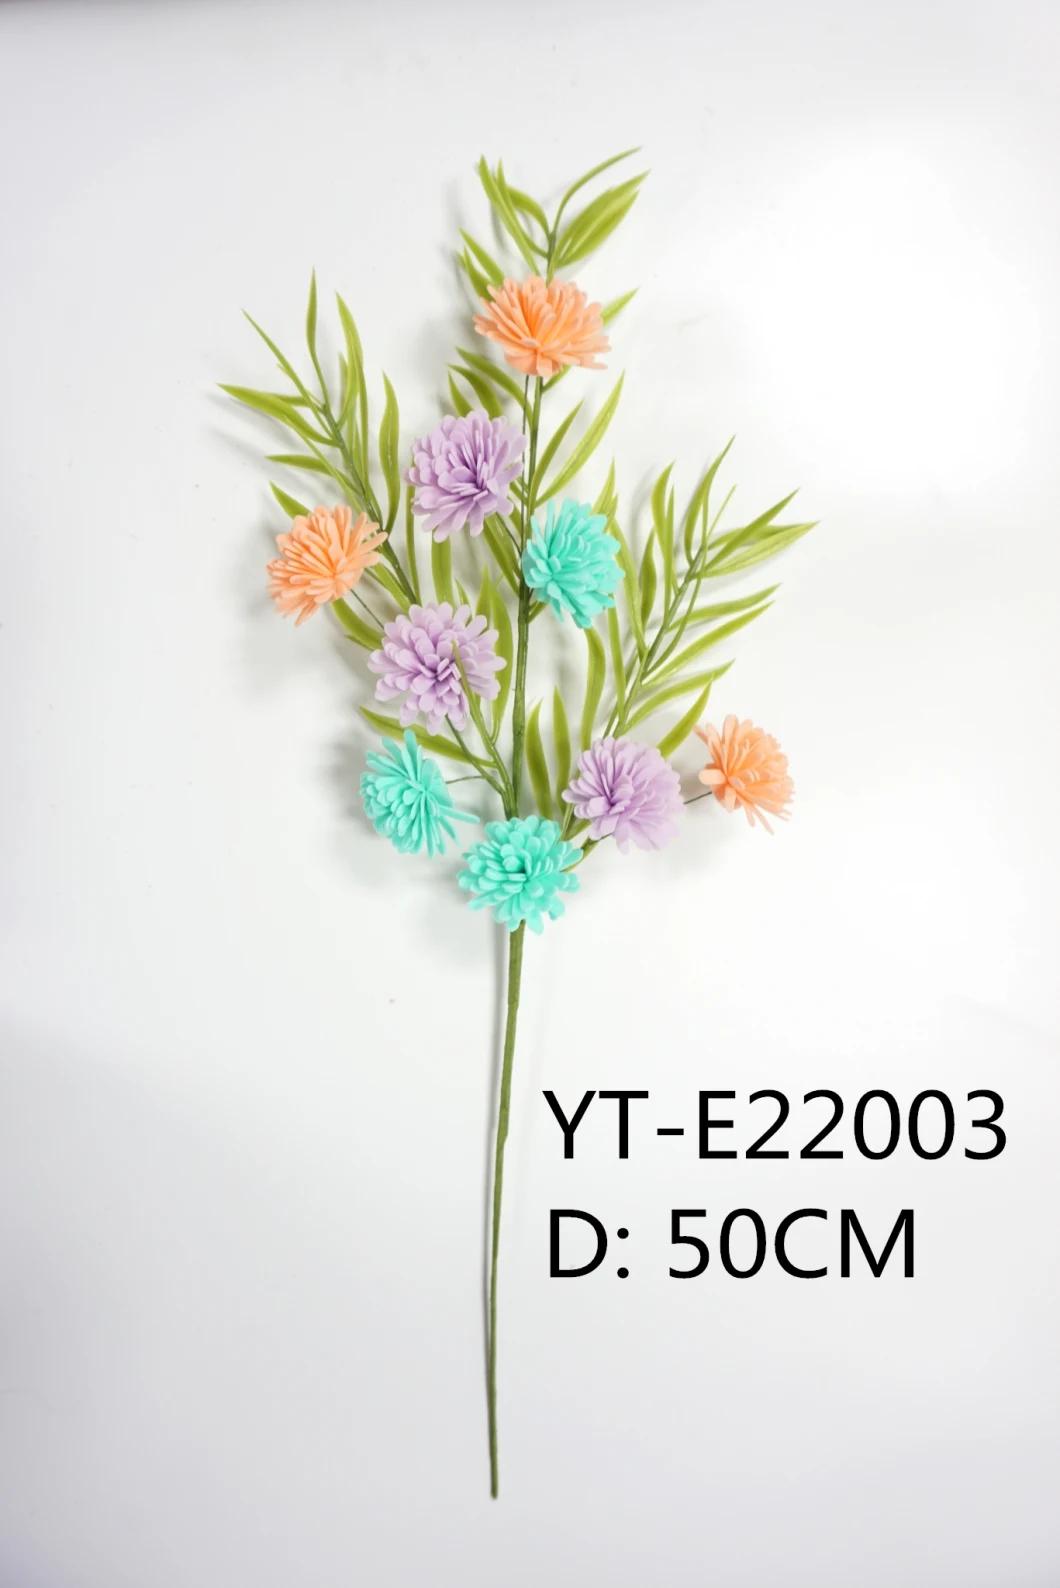 2022 Spring Easter Picks for Decor with Wholesale Price